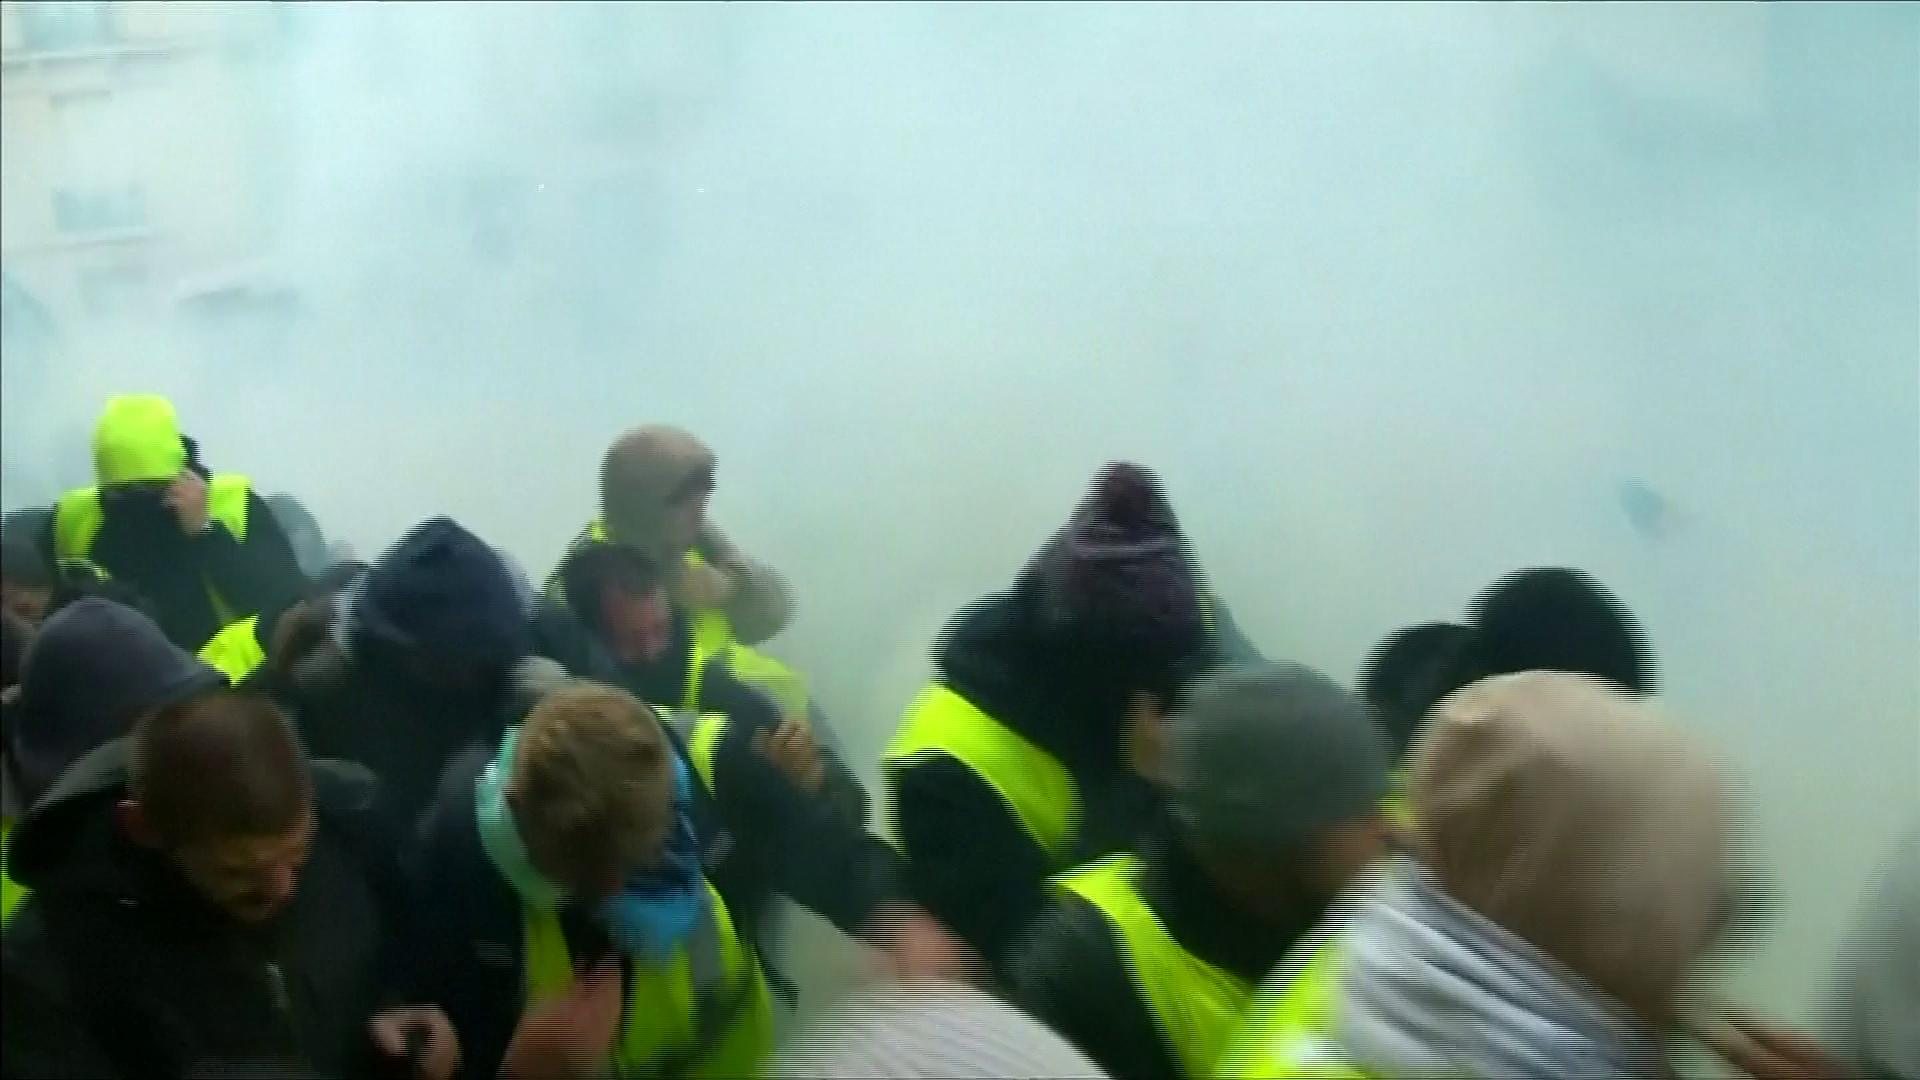 Police fire tear gas at Paris protesters